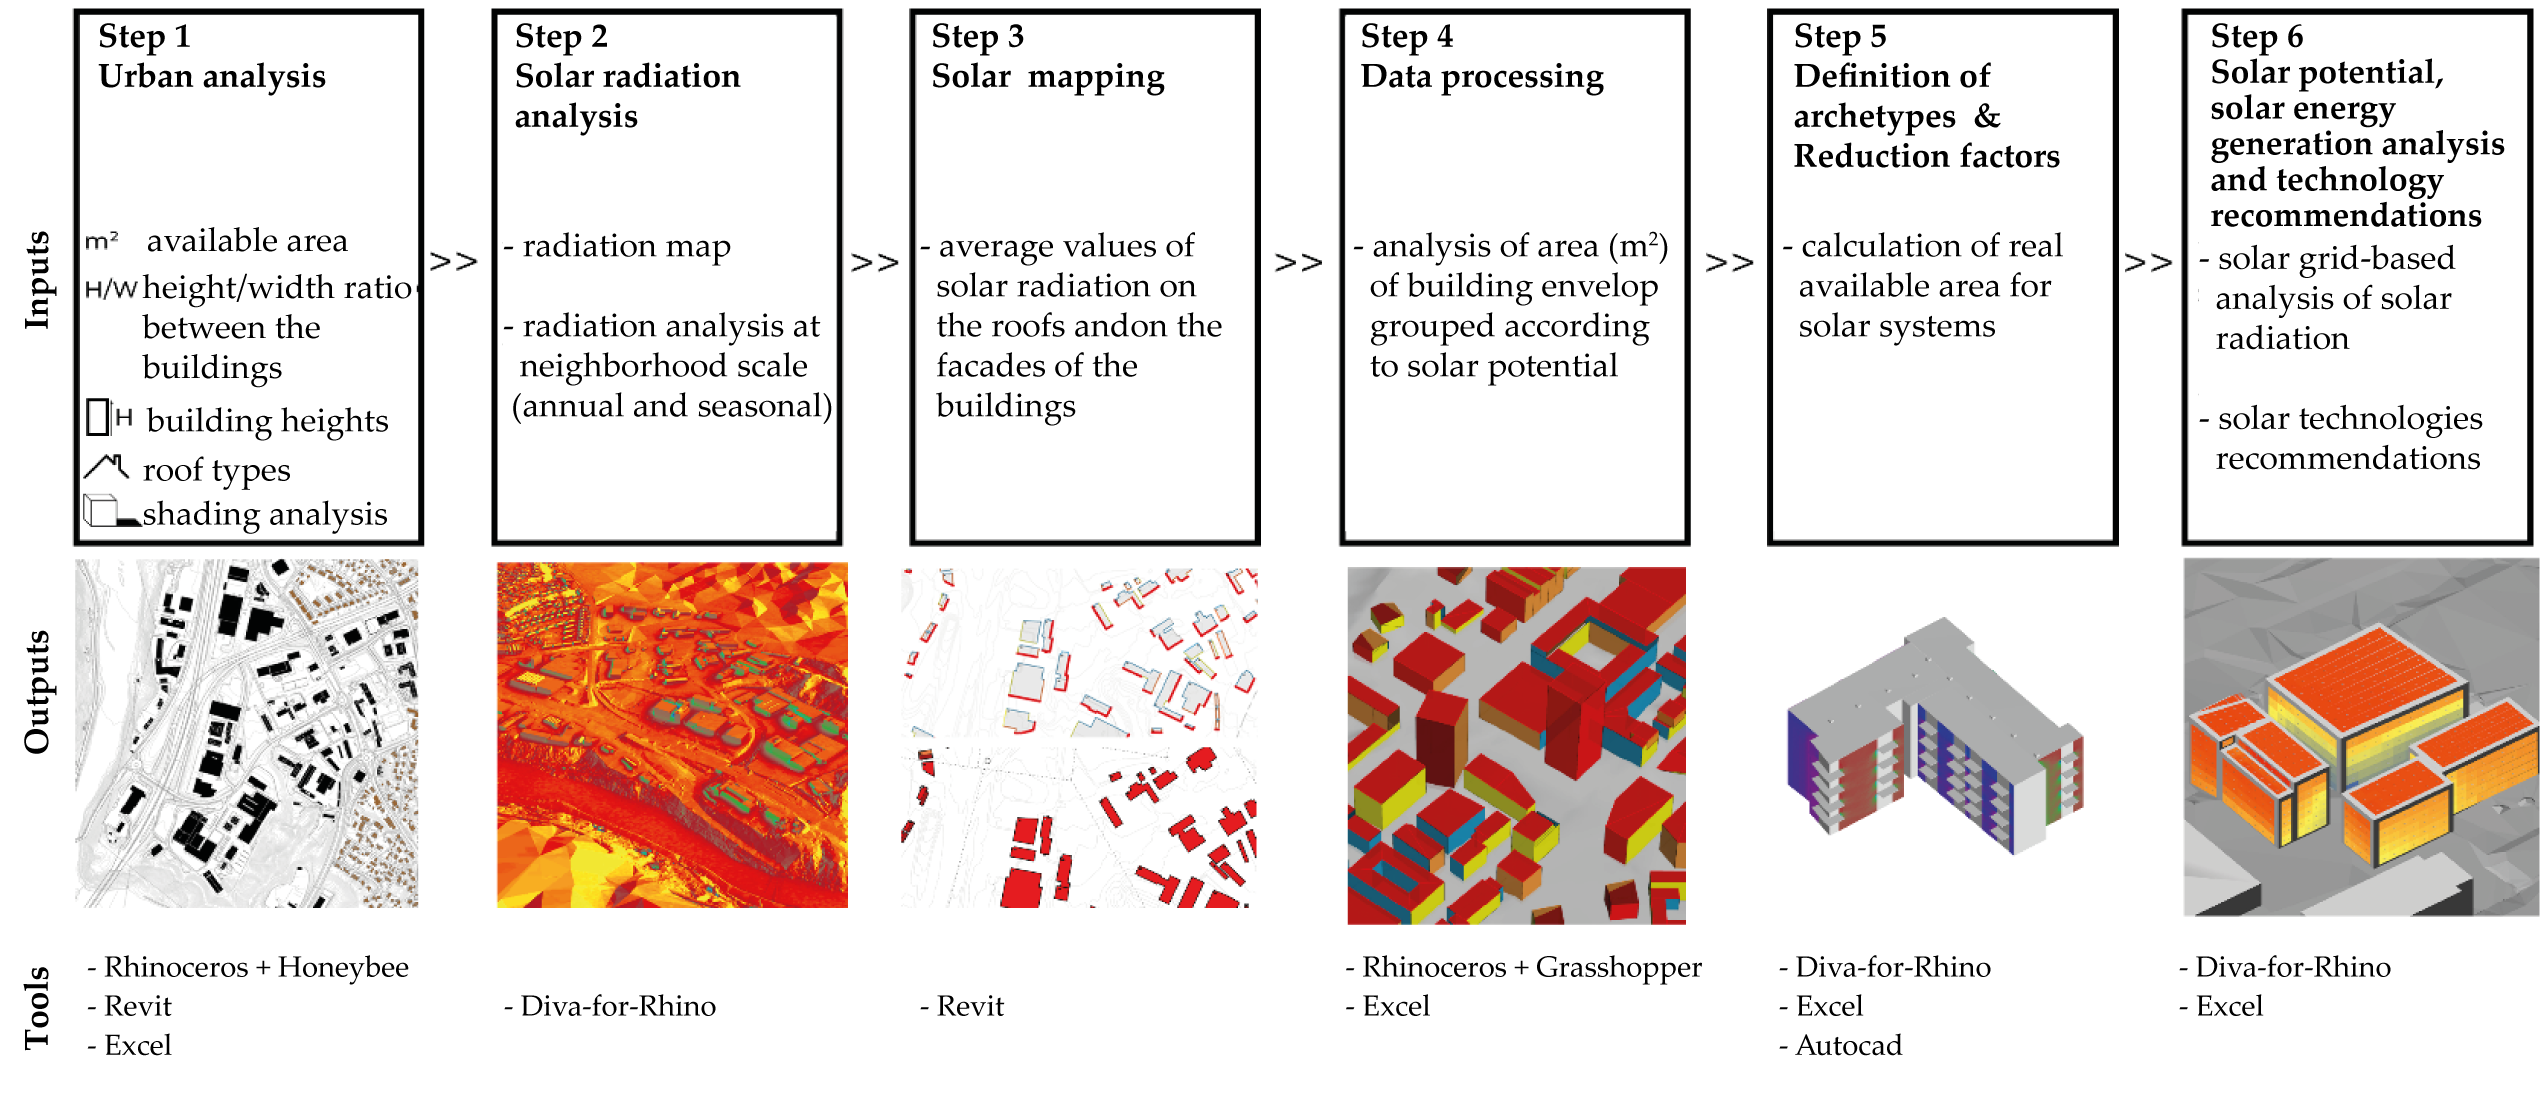 Energies | Free Full-Text | A Methodological Analysis Approach to Assess Solar Energy Potential at the Neighborhood Scale HTML